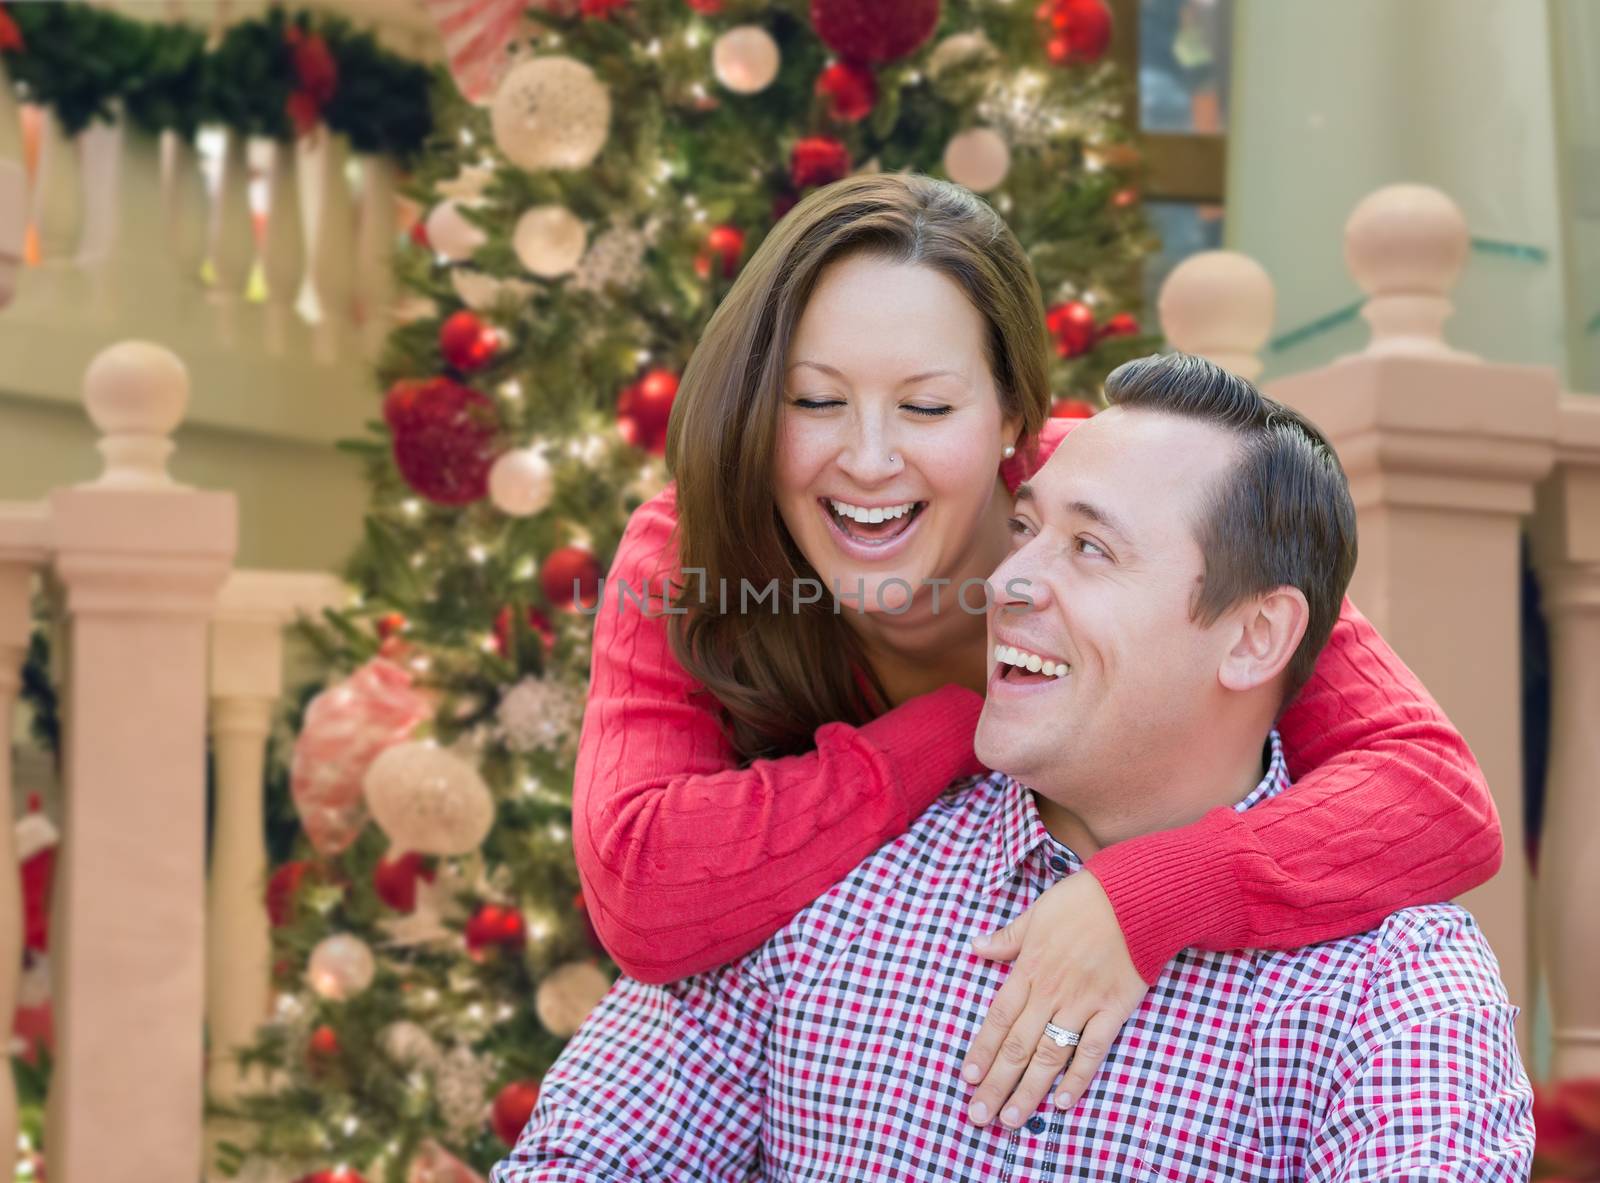 Caucasian Couple Laughing In Front of Decorated Christmas Tree.